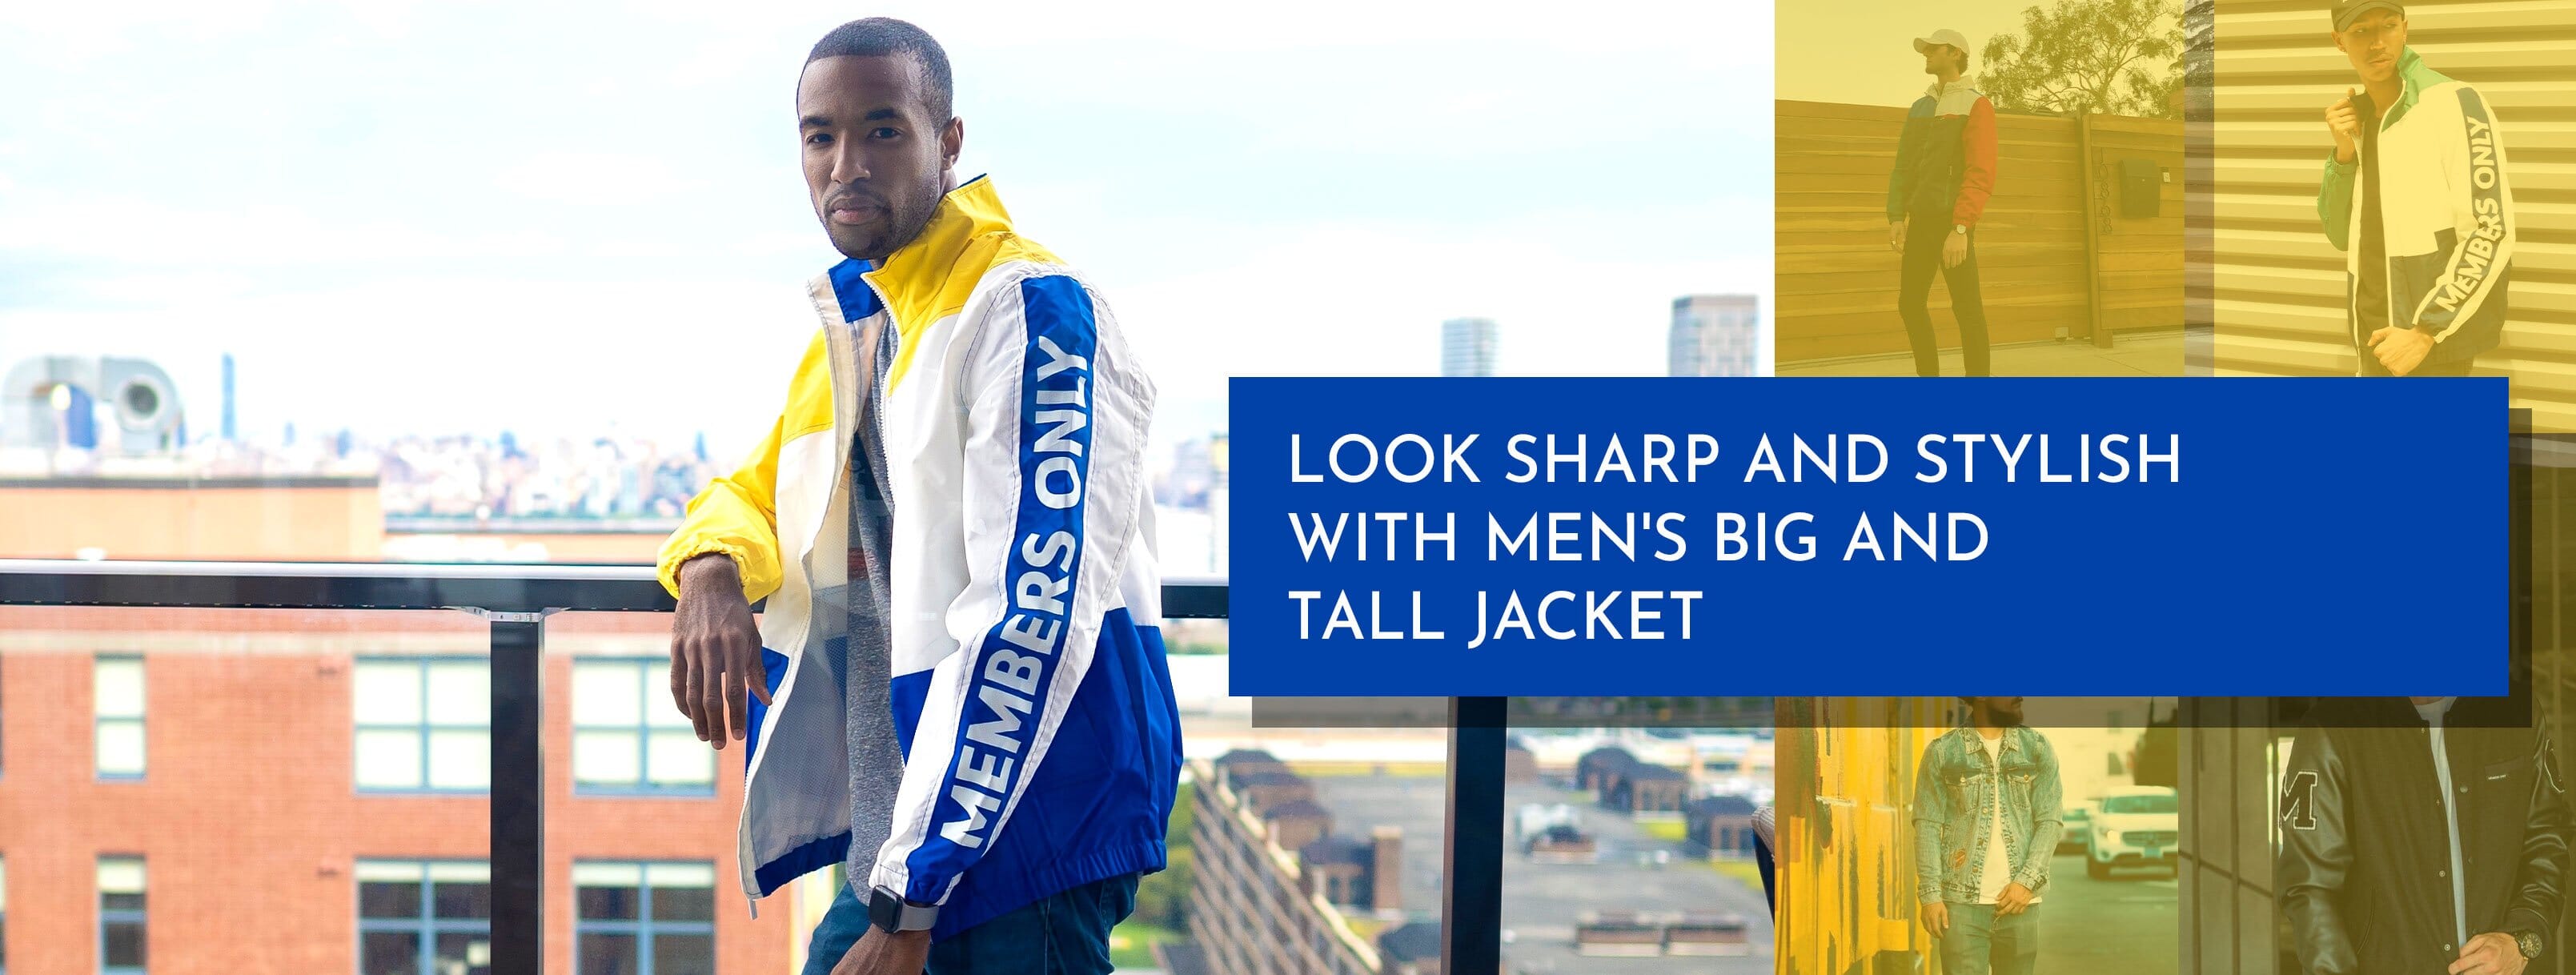 Look Sharp And Stylish With Men's Big And Tall Jacket